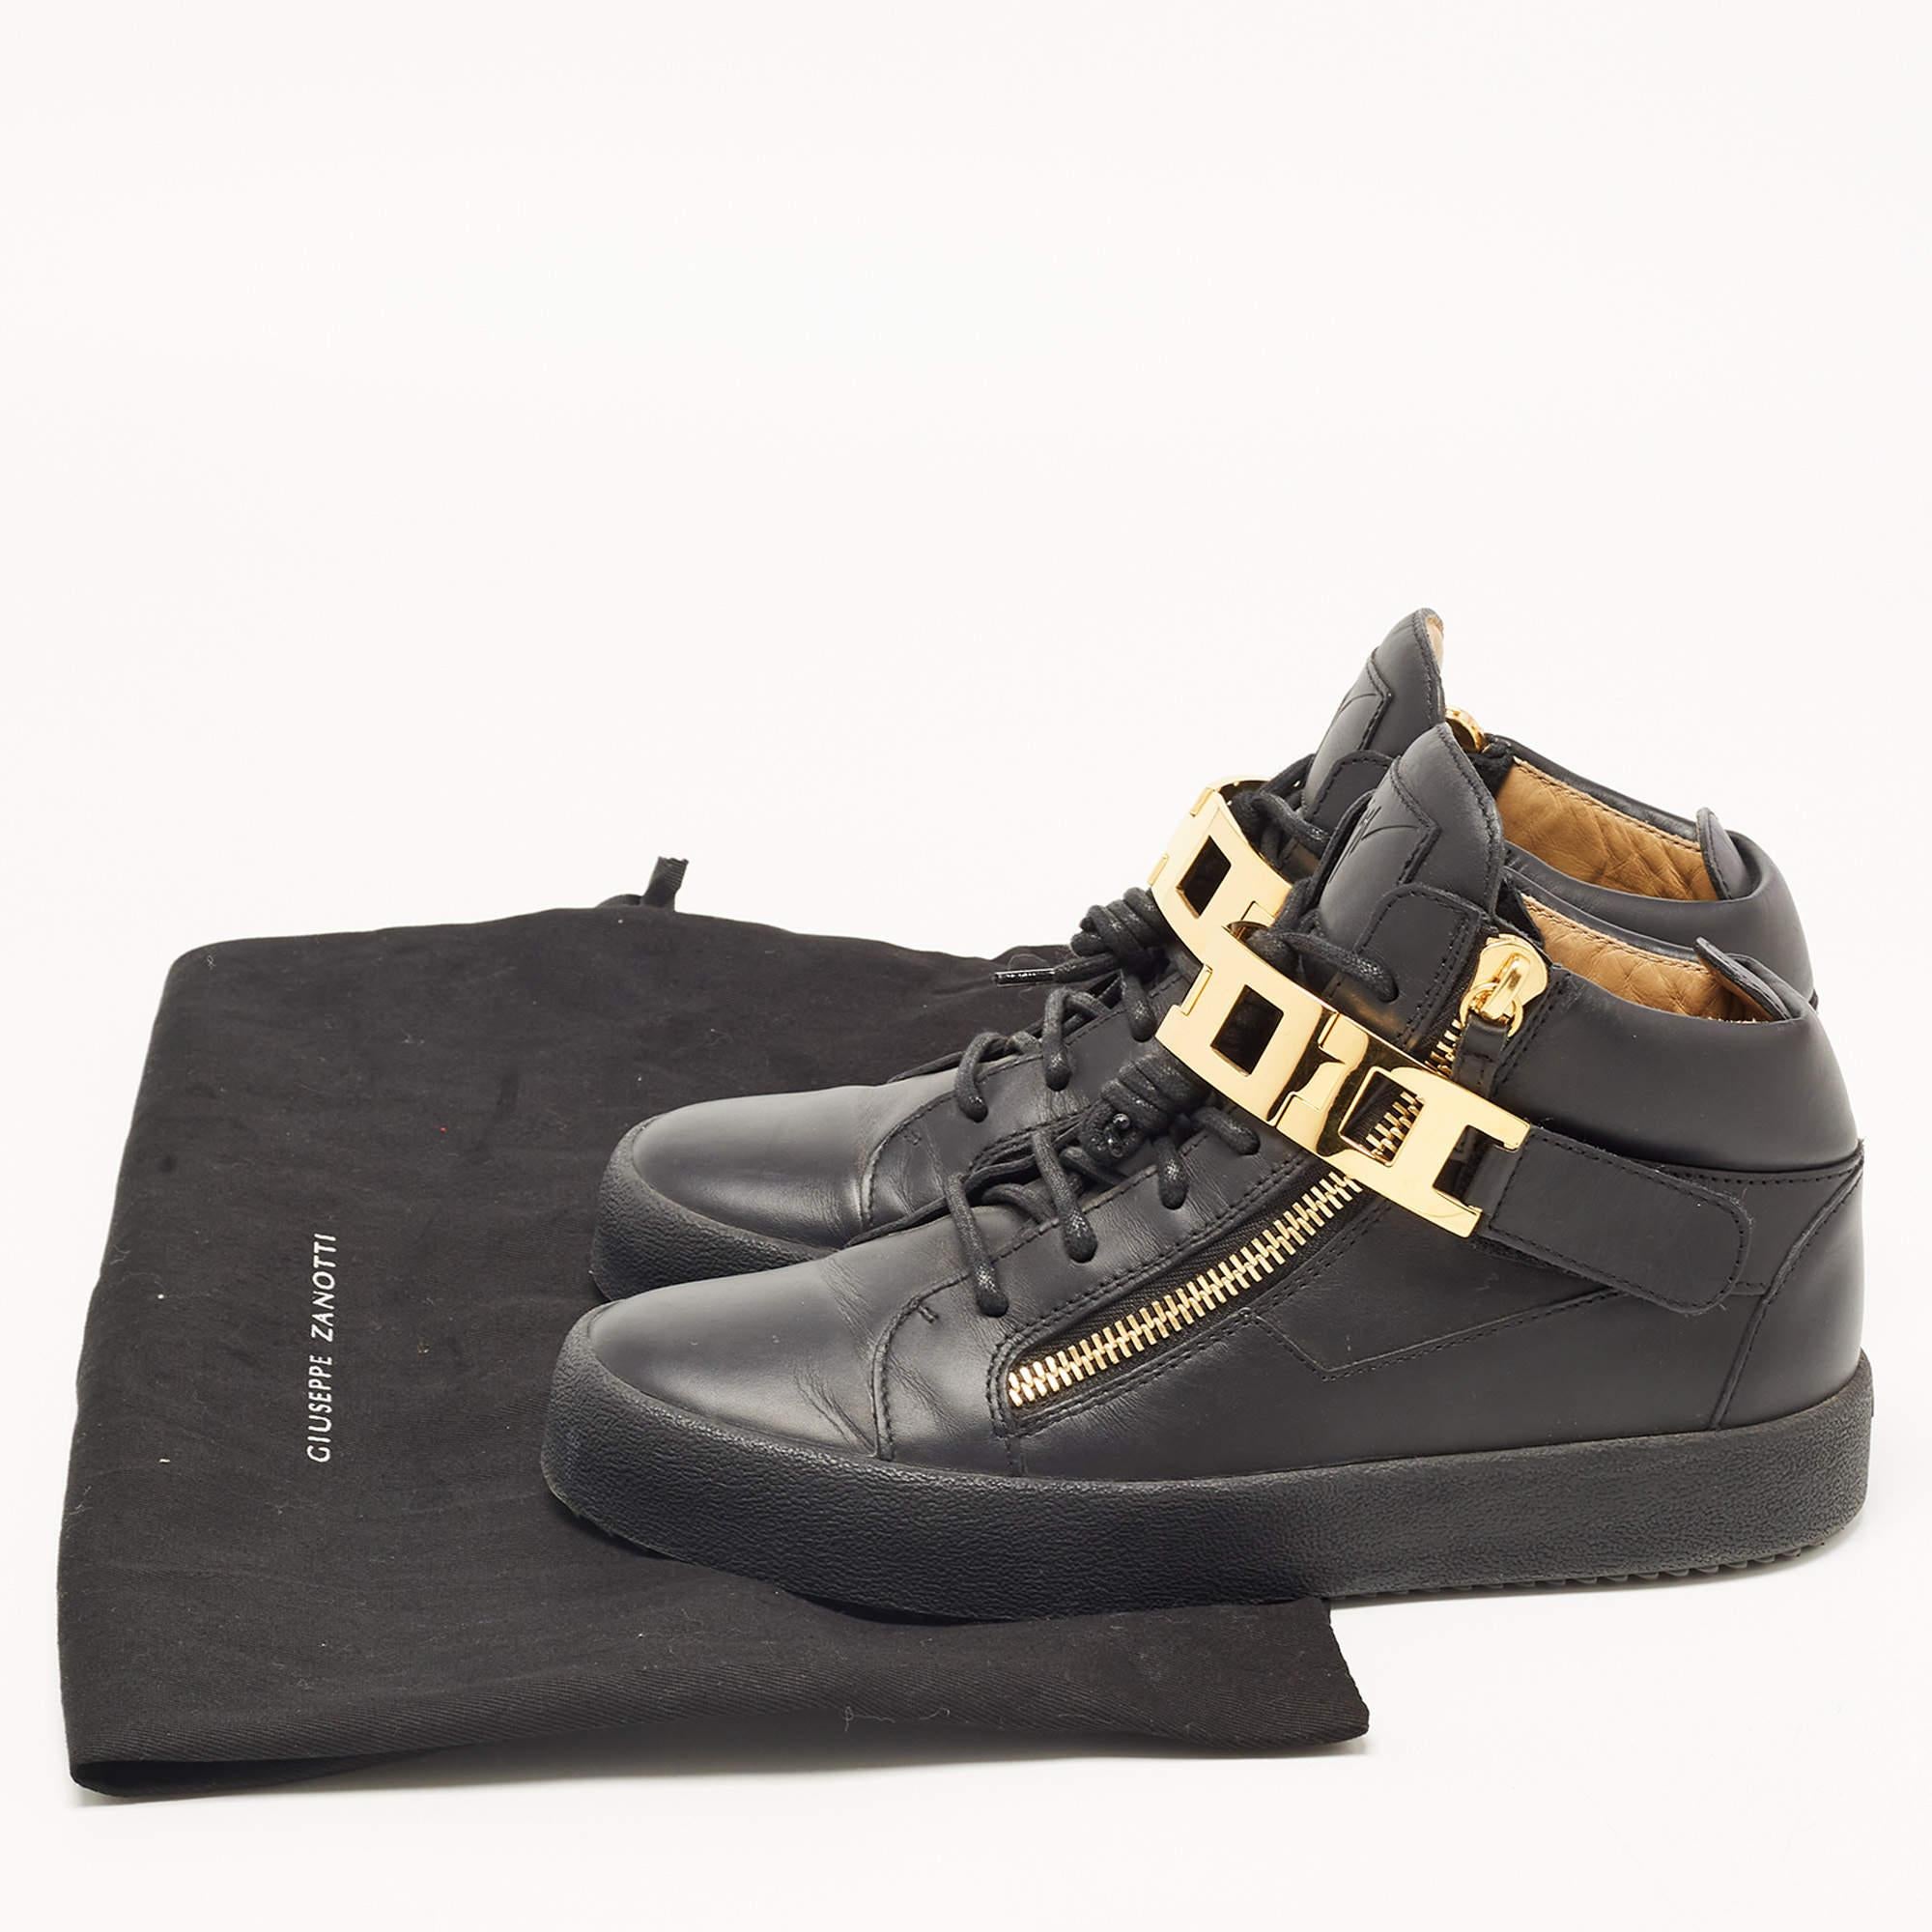 Giuseppe Zanotti Black Leather High Top Sneakers Size 40 For Sale 5